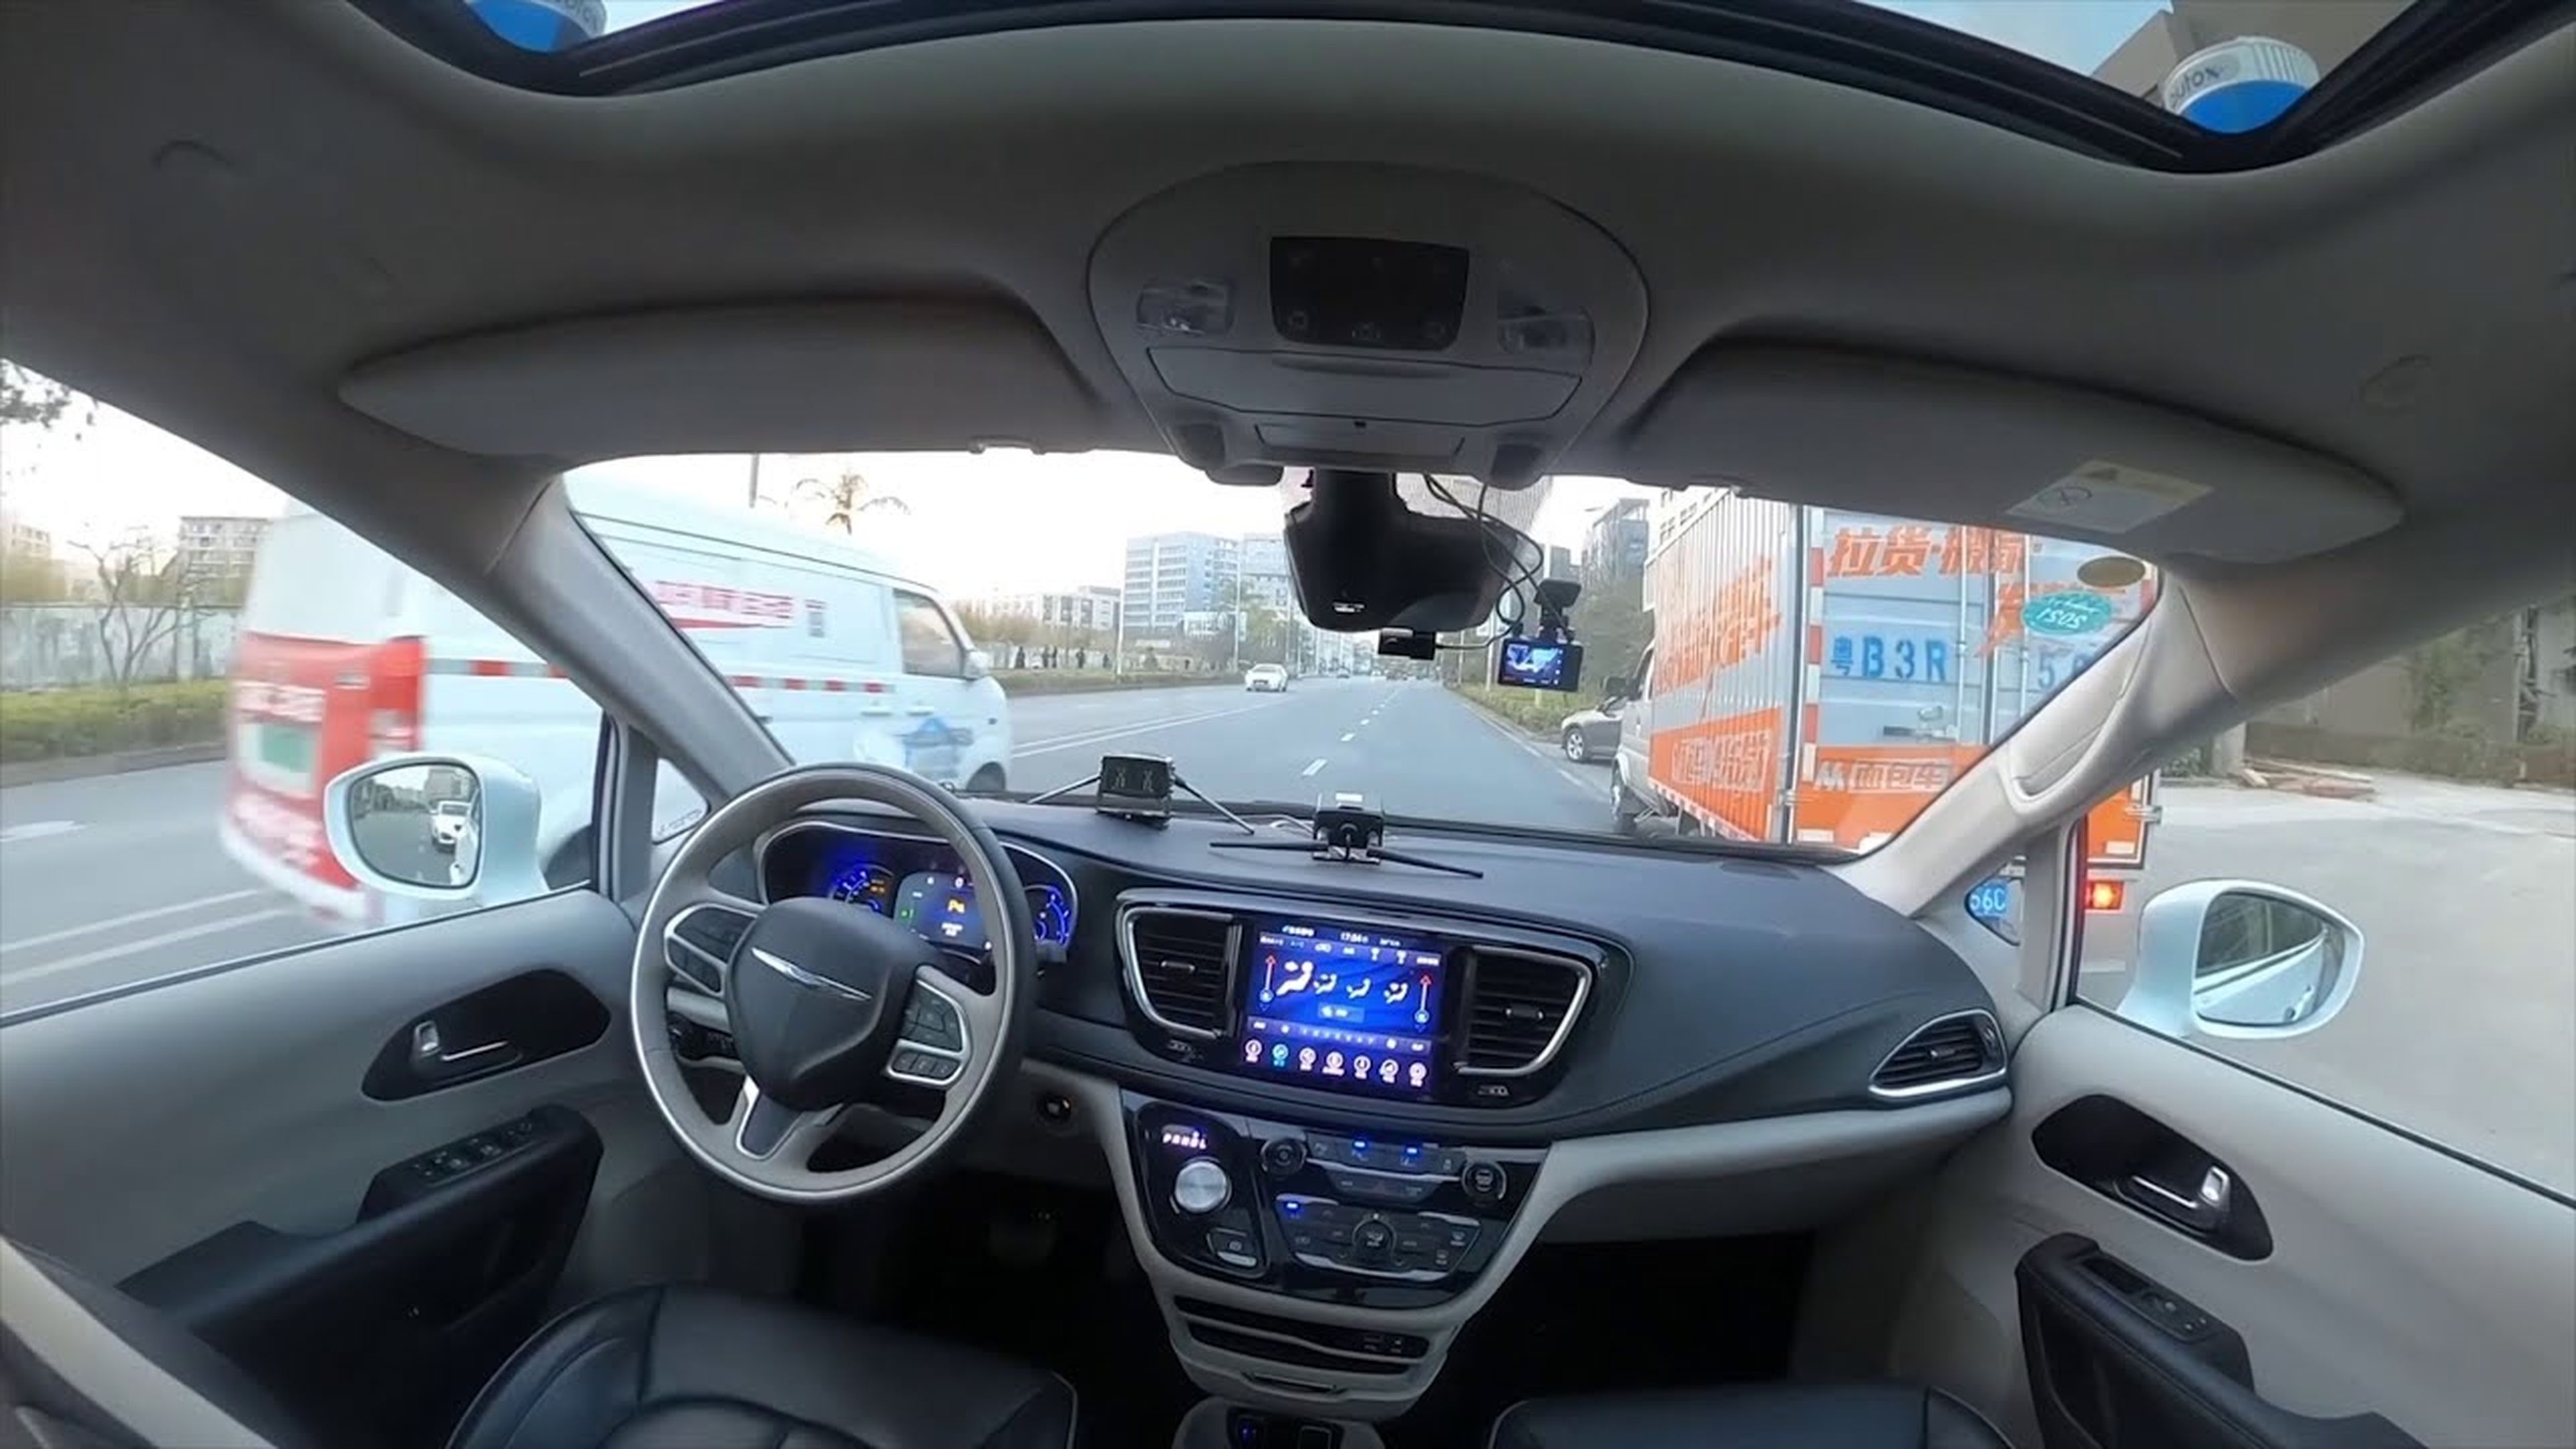 AutoX Opens Its Fully Driverless RoboTaxi Service to the Public in China (English)